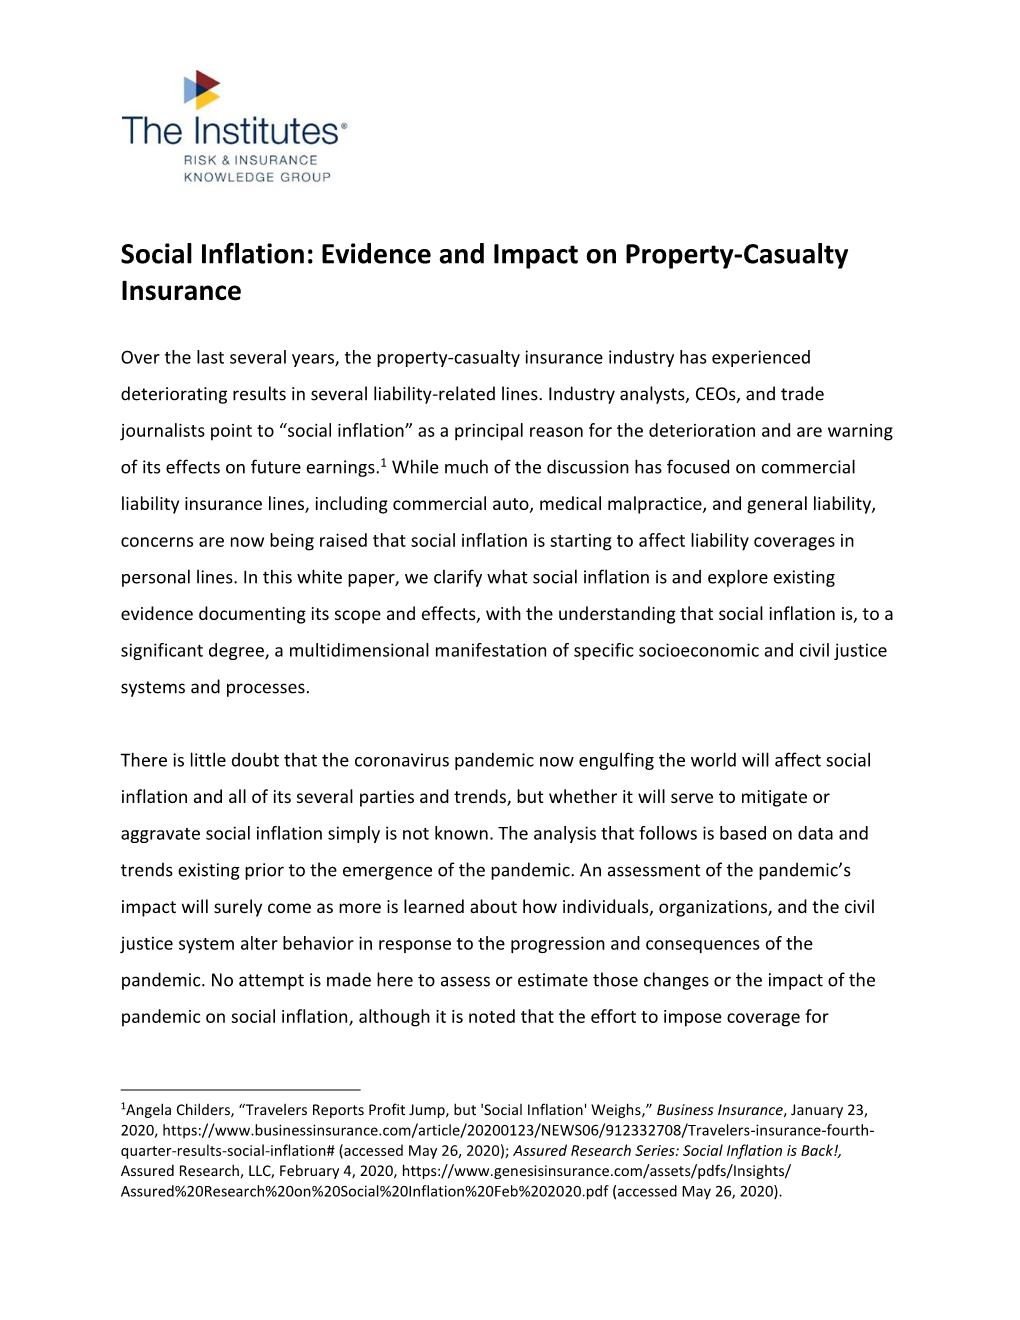 Social Inflation: Evidence and Impact on Property-Casualty Insurance